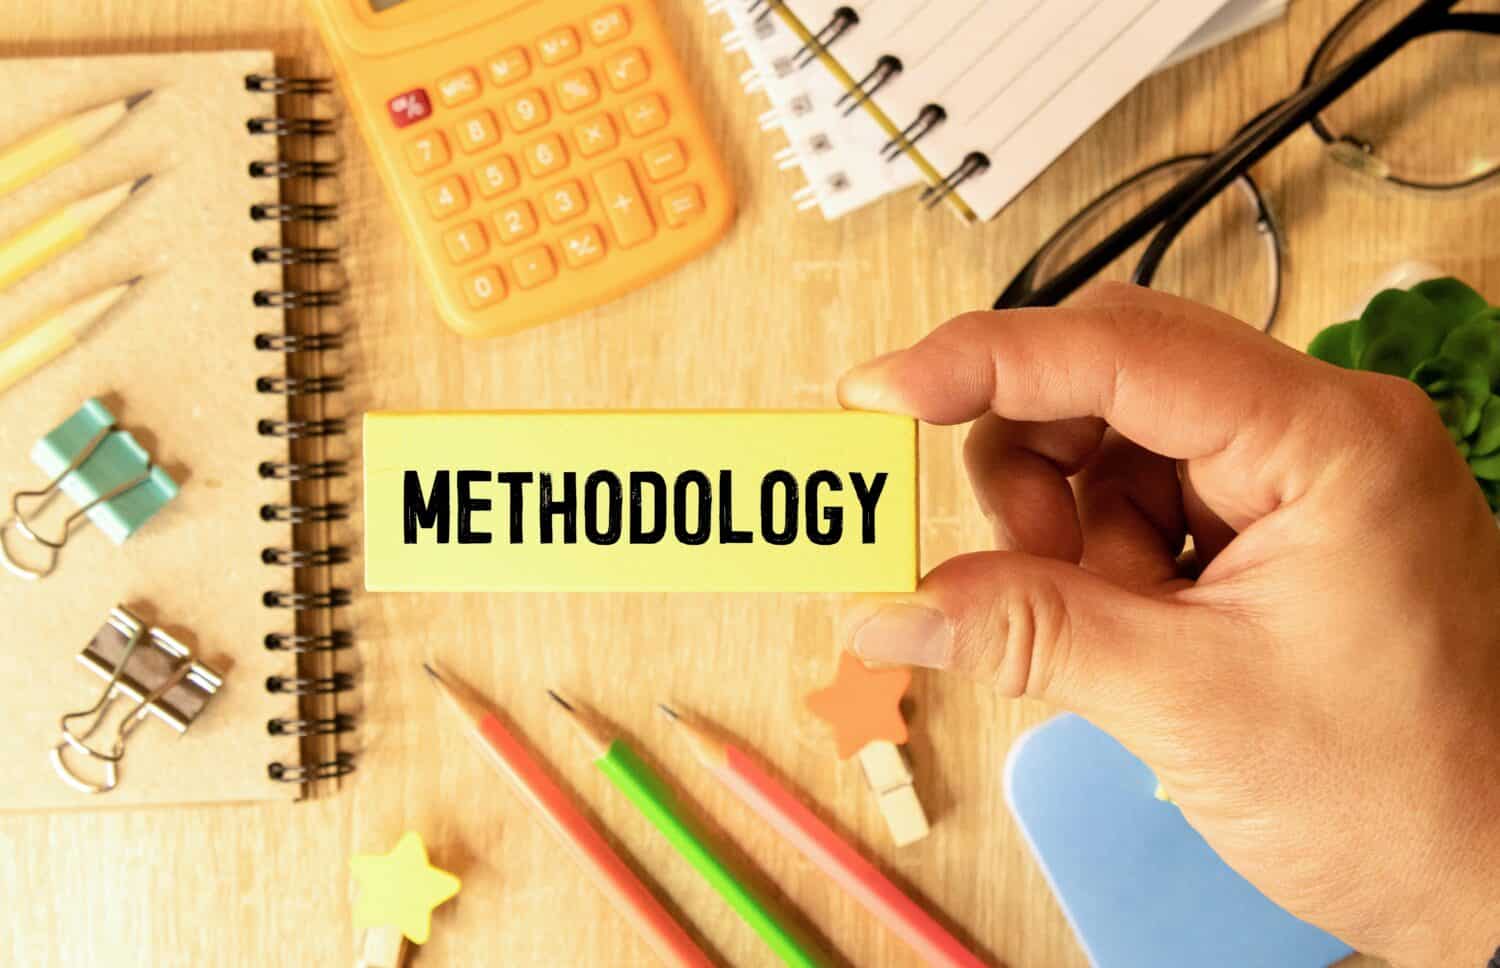 The word methodology written on a notebook on business office desktop. System of methods used in a study or activity concept.